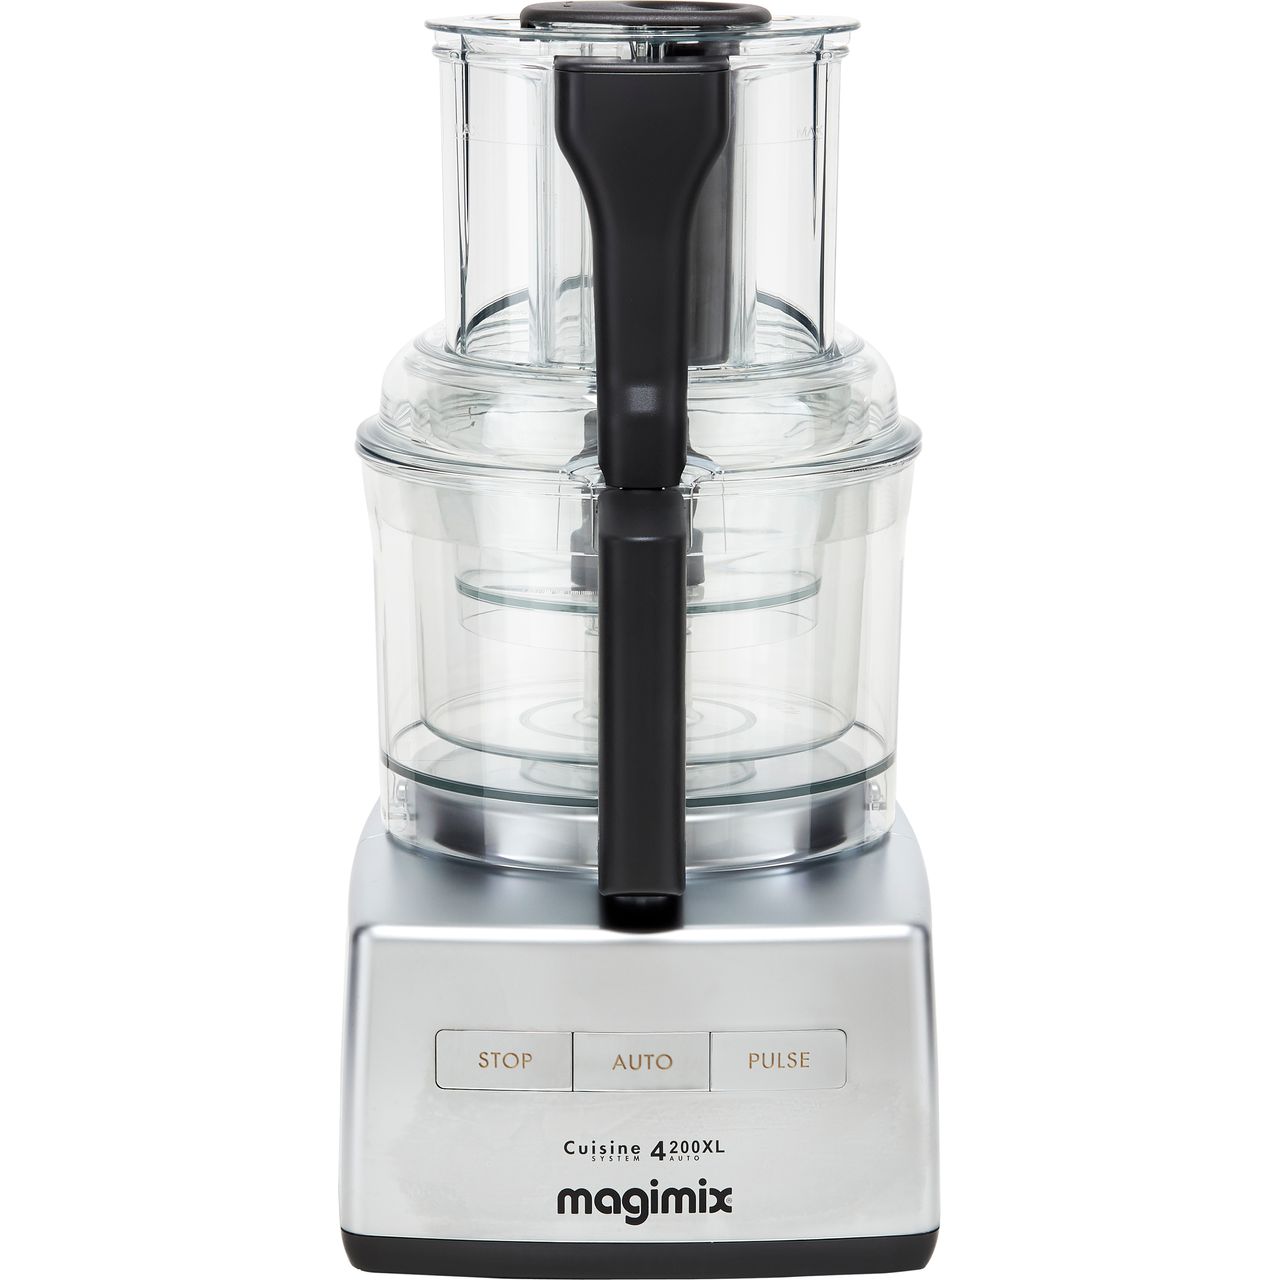 | Magimix Food Processor | Satin Stainless Steel |